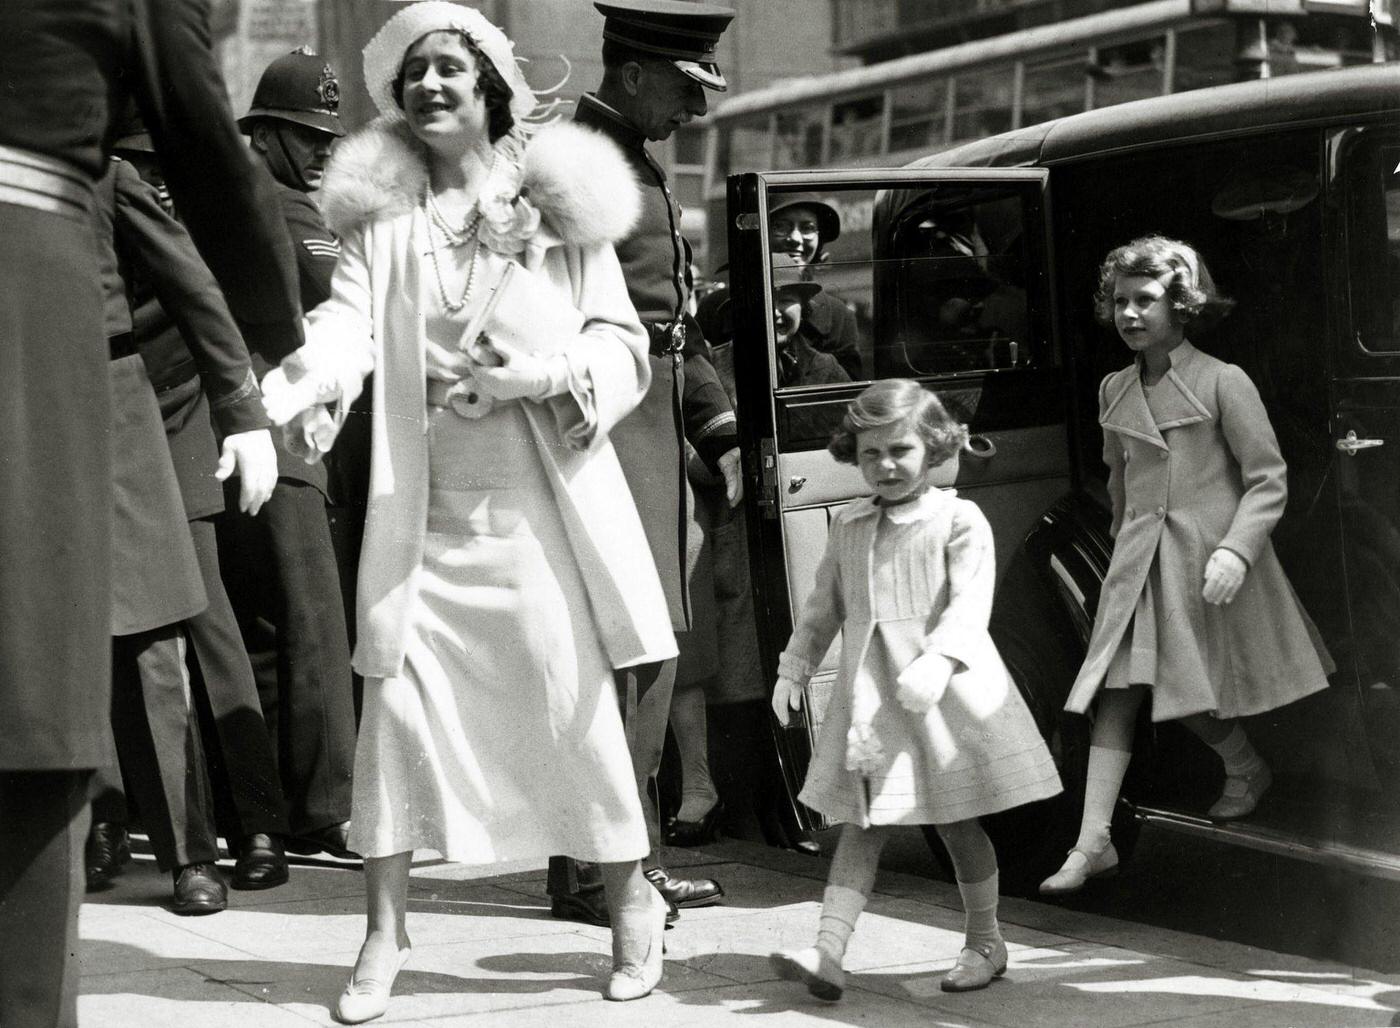 The Duchess of York with her children Princess Margaret and Princess Elizabeth arriving at the Royal Tournament at Olympia, London.